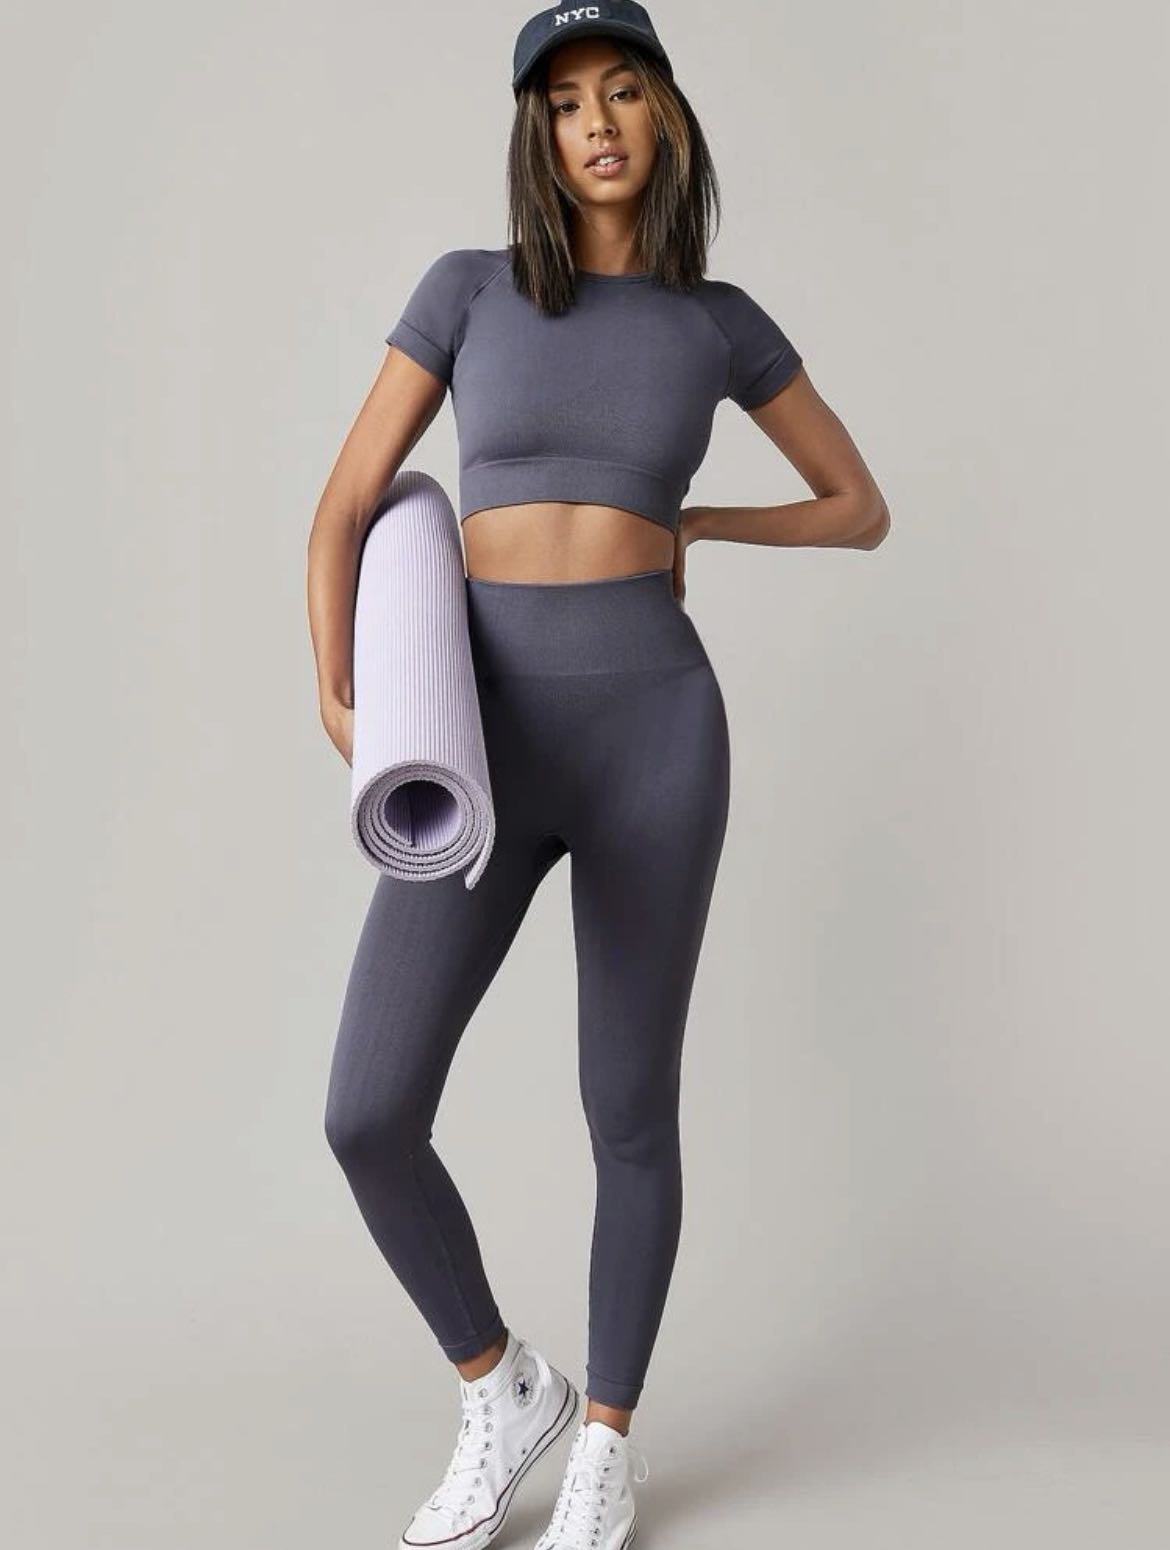 Queen Bee - Jenna High Waist Active Shaping Tights in Persian Rose